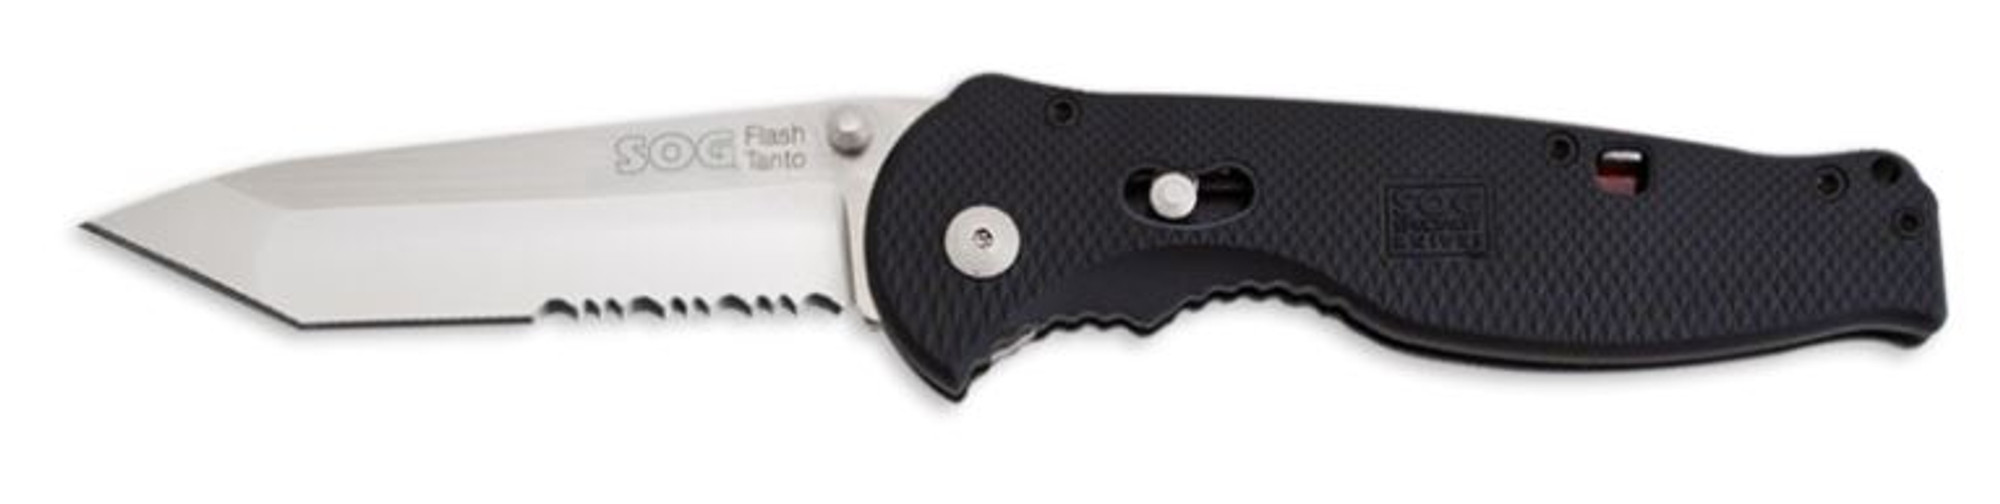 SOG Flash II FSAT98 Tanto Assisted Opening